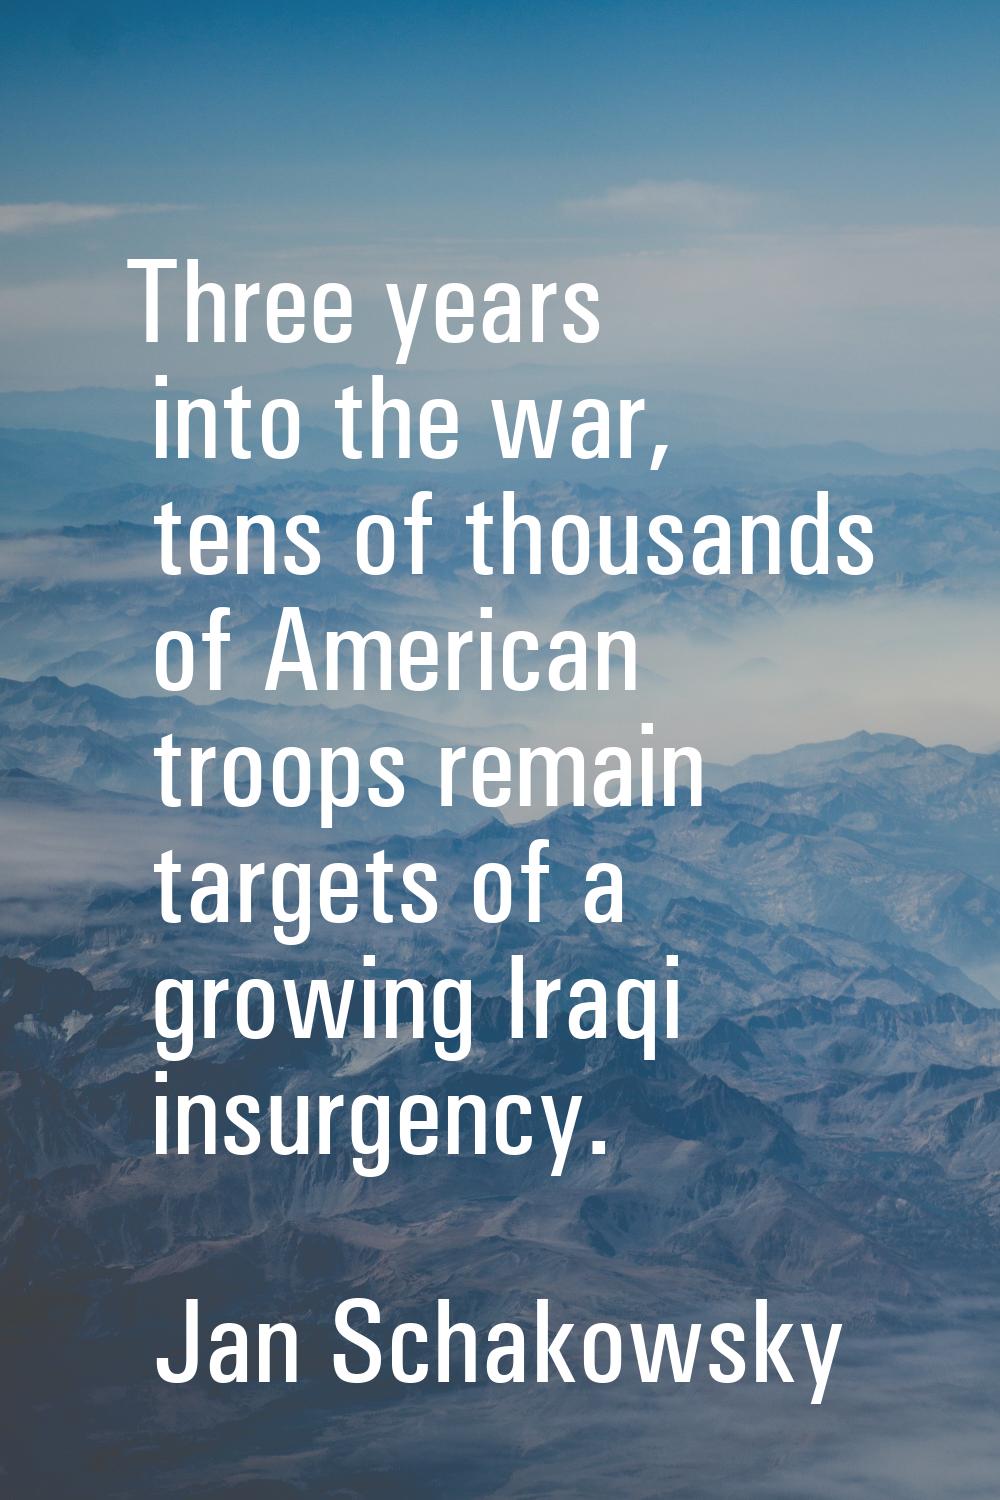 Three years into the war, tens of thousands of American troops remain targets of a growing Iraqi in